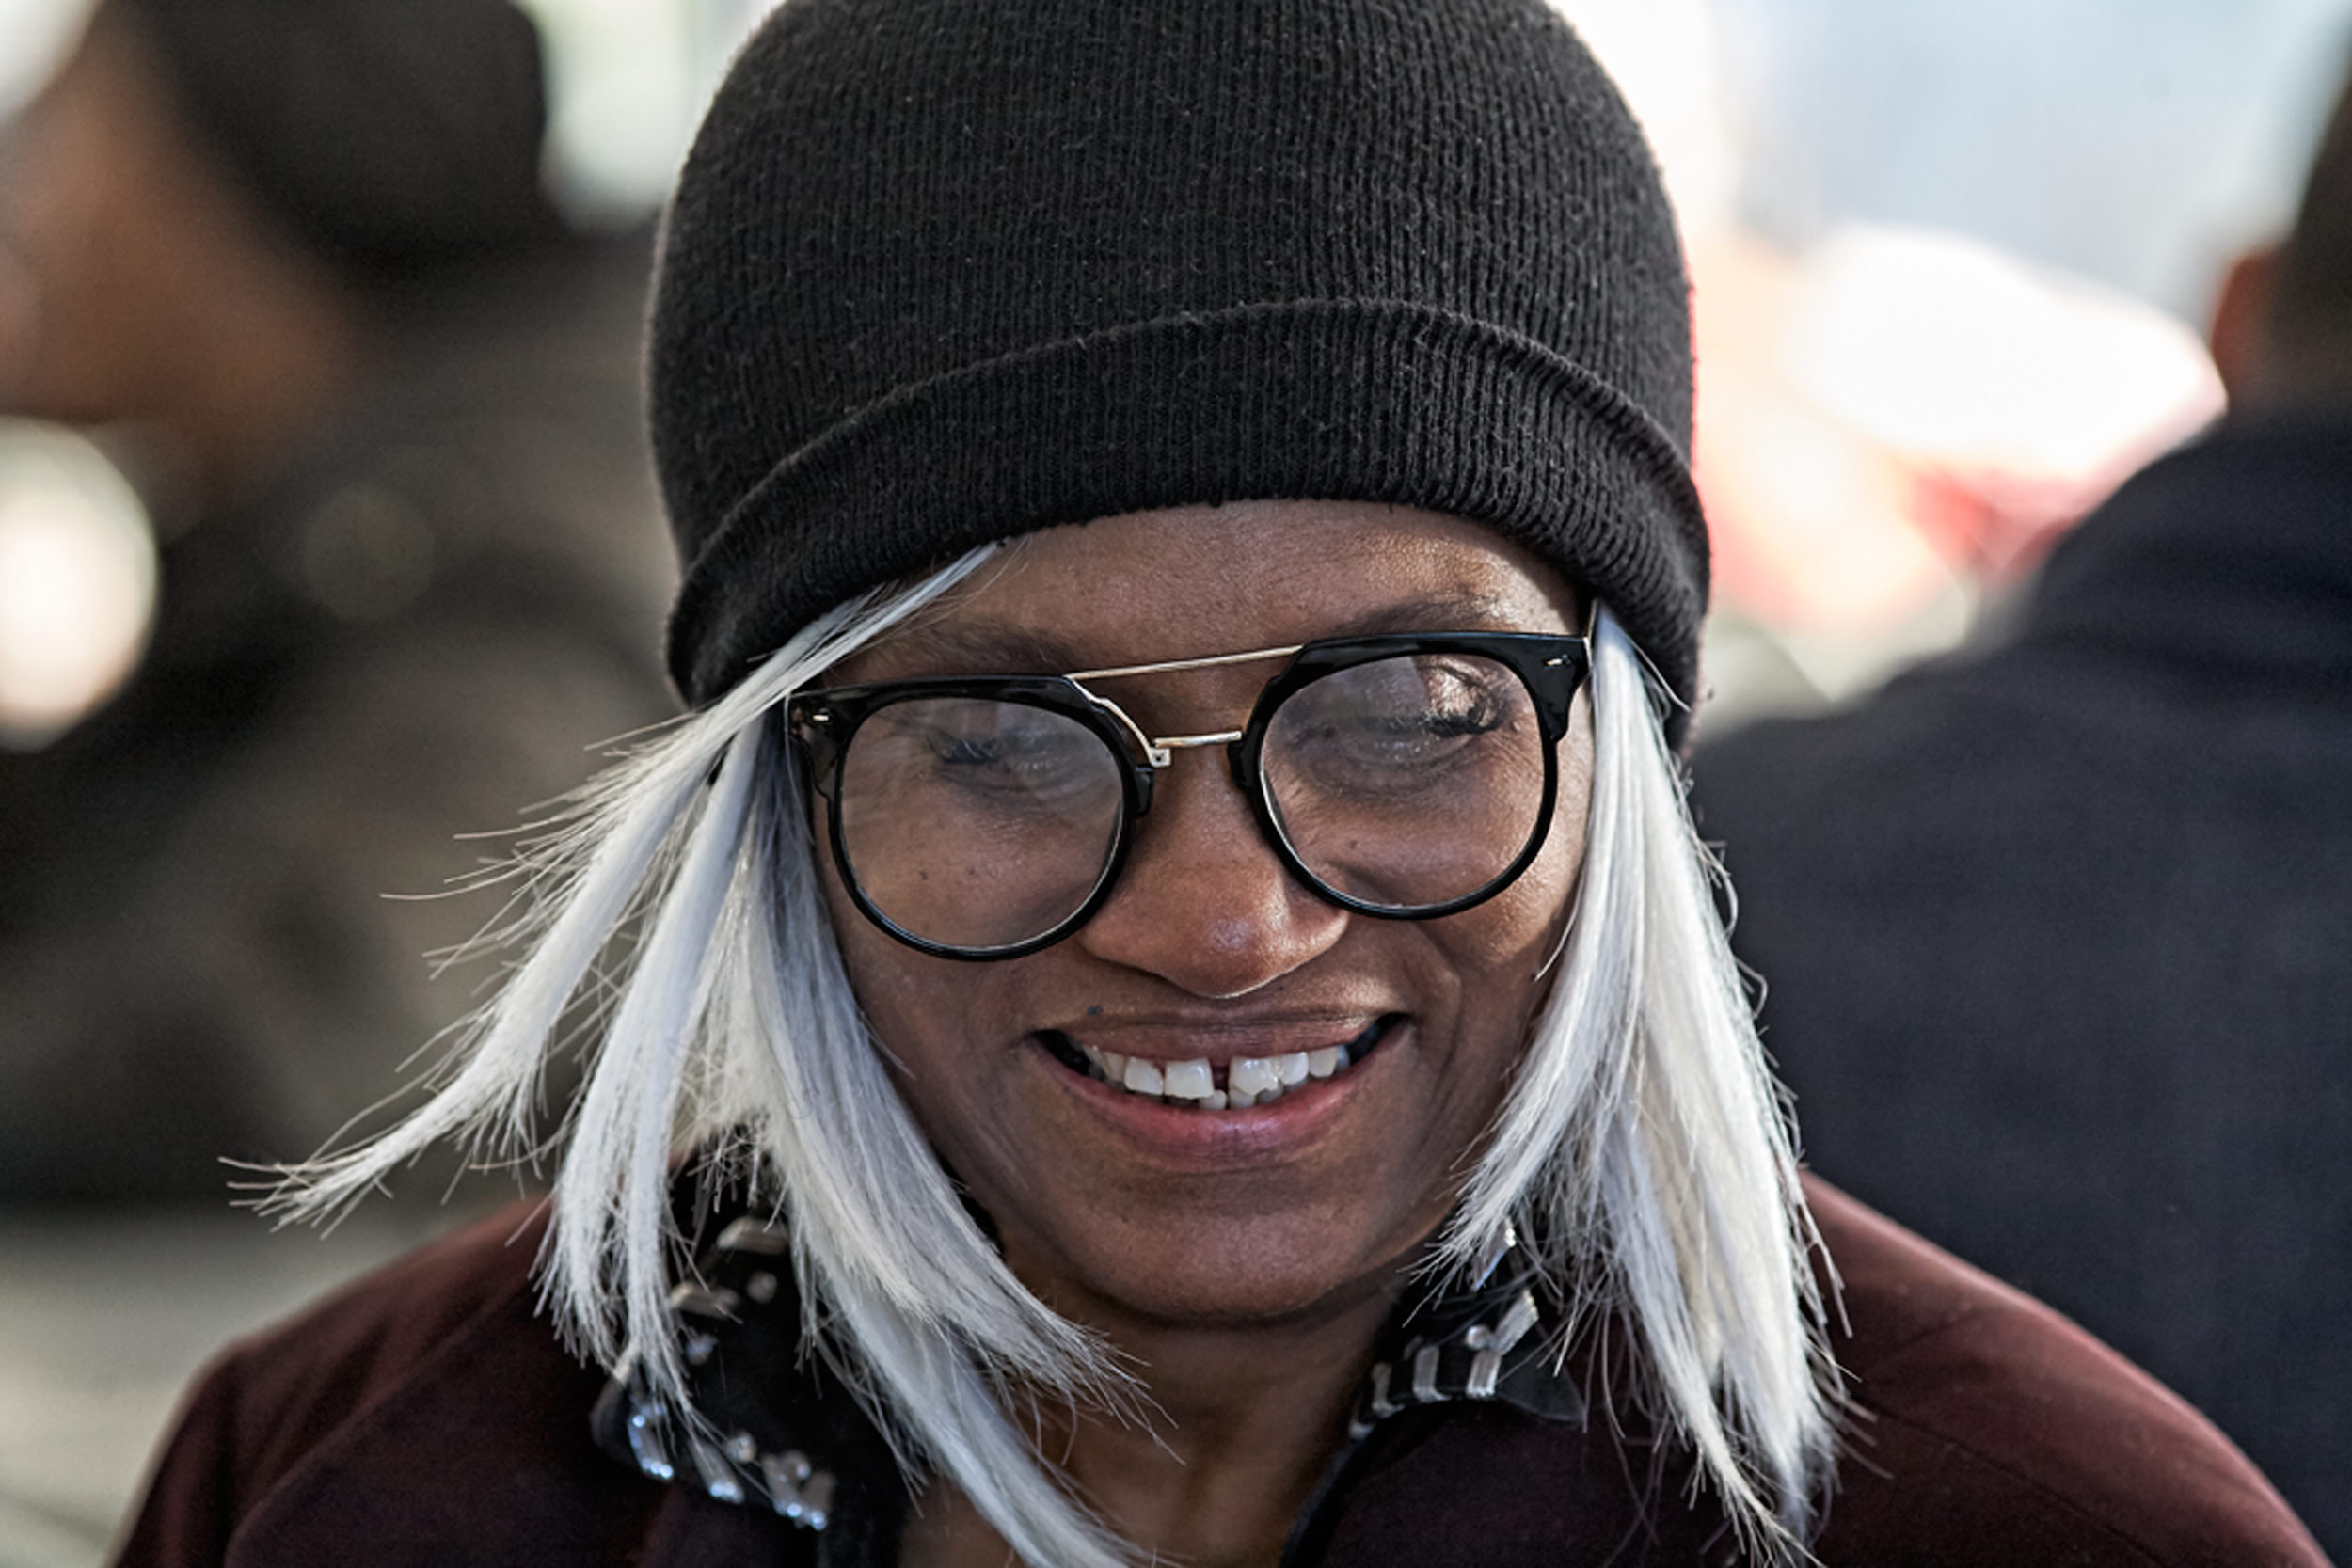  Lifestyle Portrait Photographer In North Central Ohio Woman With Glasses In Beanie Giggles Using Bokeh To Enhance Scene At Warsaw CMI Revival 